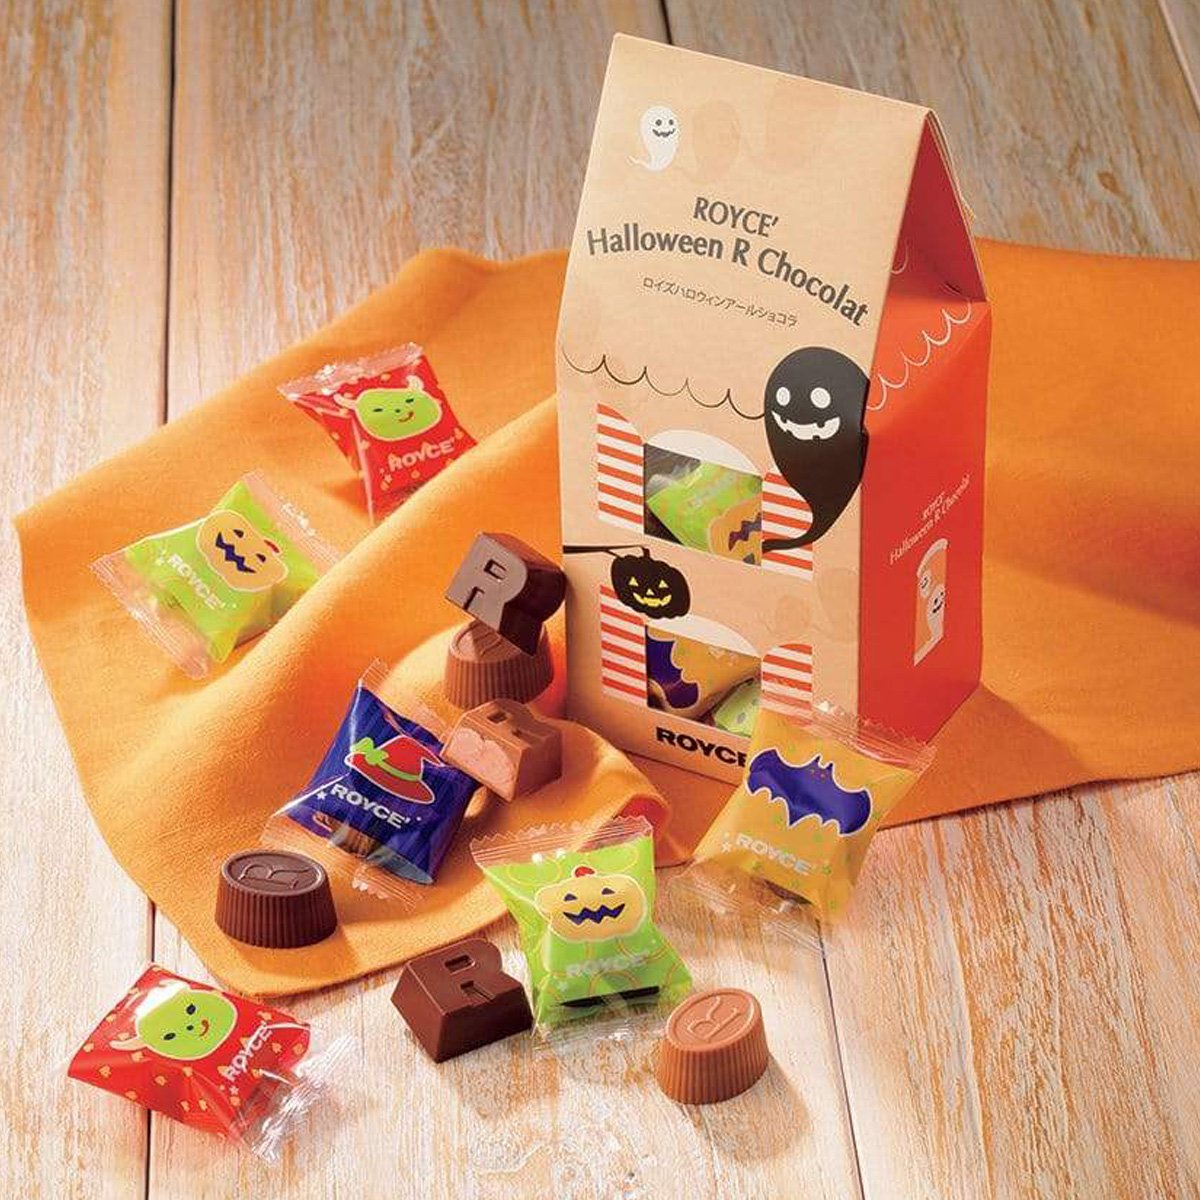 Image shows a box in orange and light brown colors with illustrations of ghosts and pumpkins. Text says ROYCE' Halloween R Chocolat ROYCE'. Accents include R-shaped and oval-shaped chocolates in hues of brown, candy wrappers in red, green, blue, and yellow with prints of pumpkins, ghouls, and a bat. There's also an orange placemat and a brown wooden background.